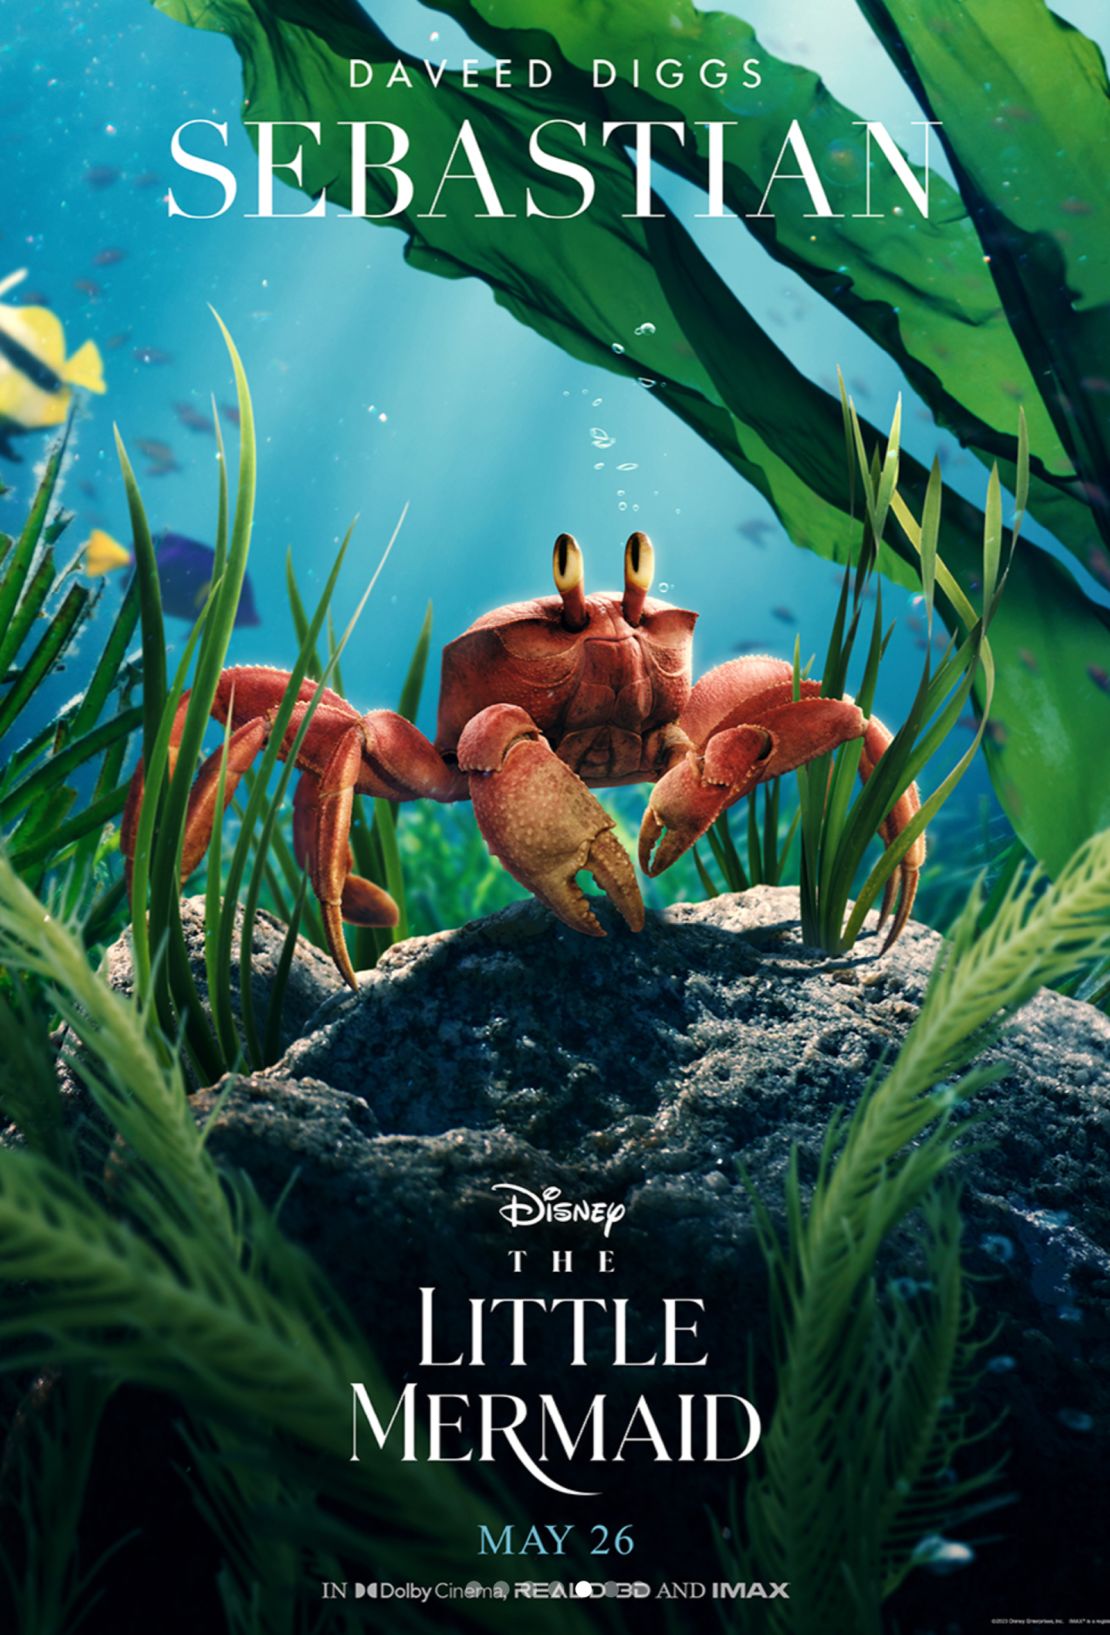 Sebastian's character poster visual for this month's 'The Little Mermaid.'